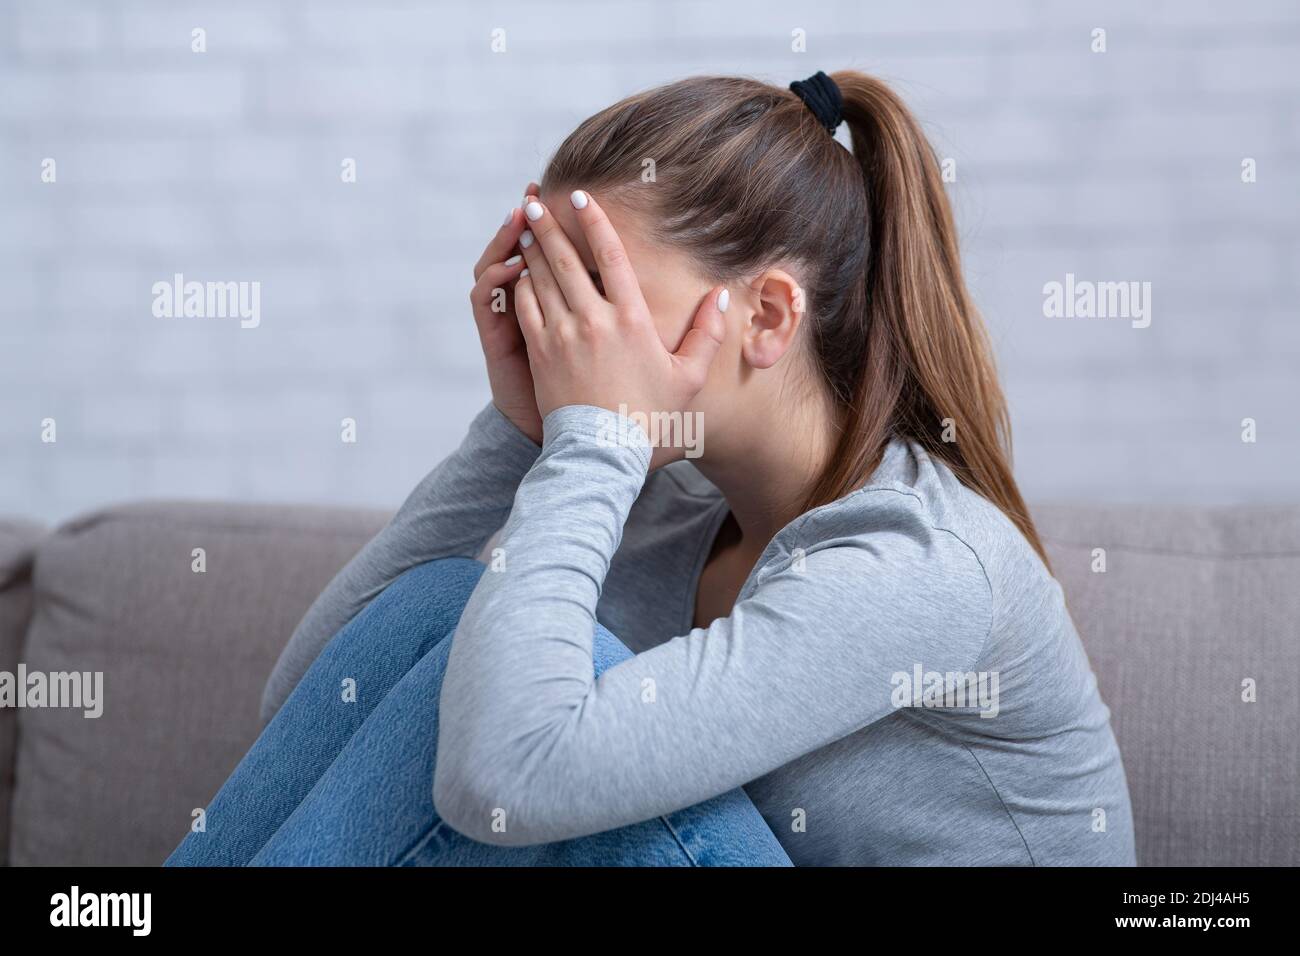 Side view of young woman with depression covering her face and crying on sofa at home Stock Photo